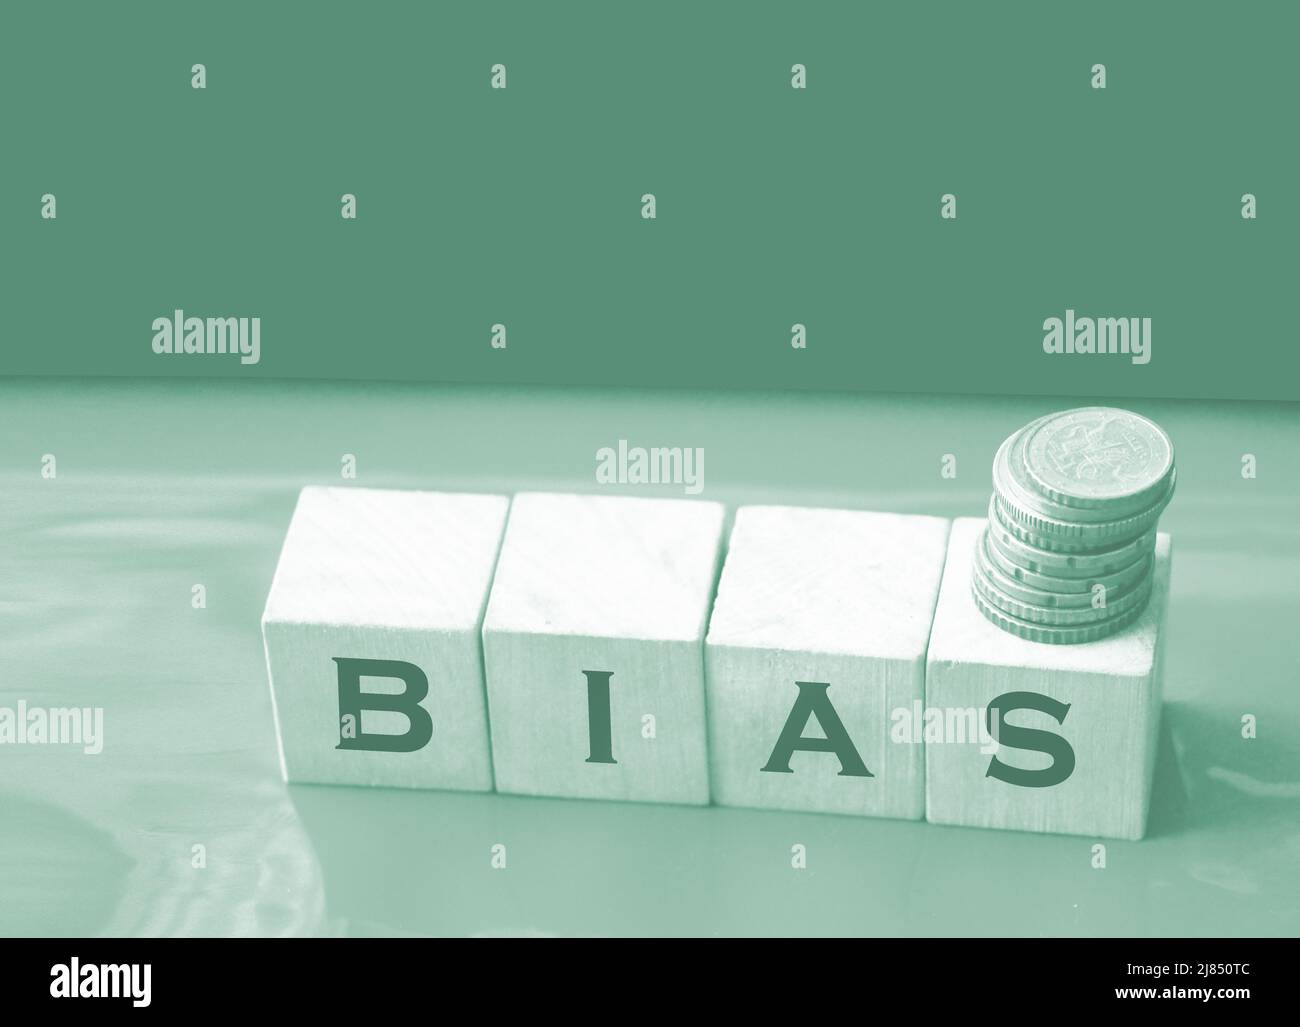 the word bias on wooden blocks on red. Social concept. Stock Photo